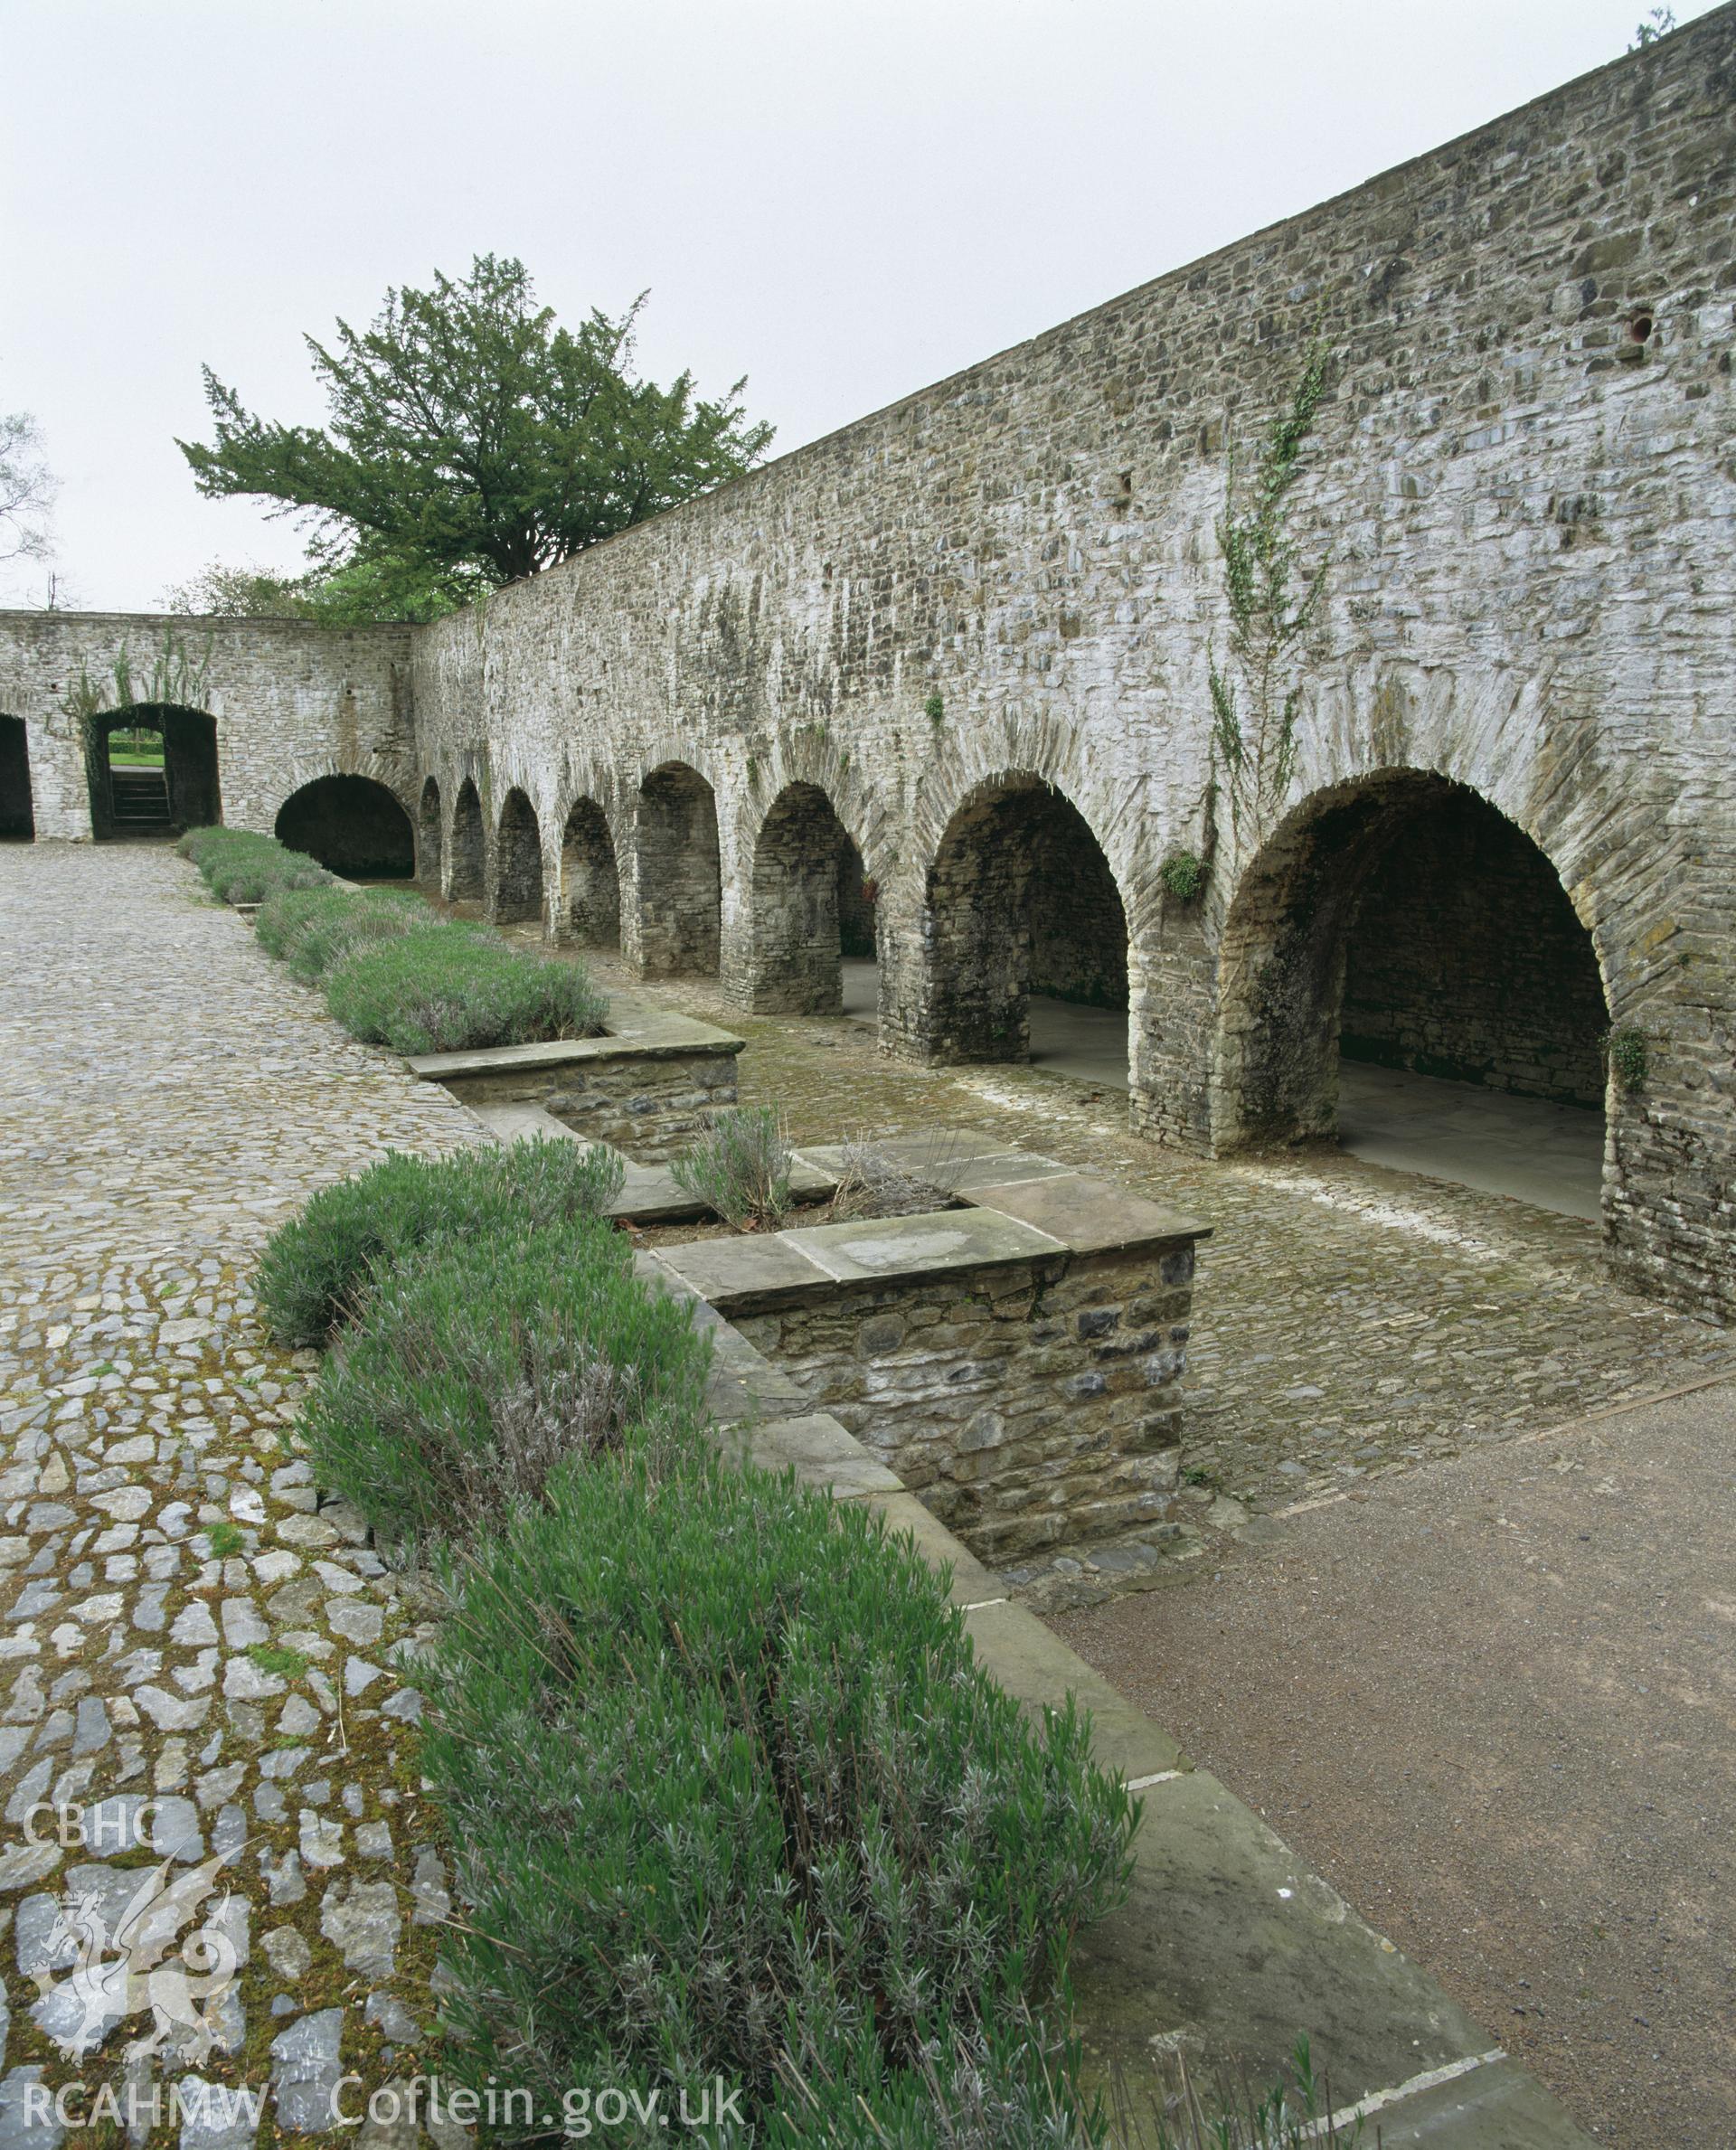 Colour transparency showing the cloister wall at Aberglasney, Llansgathen, produced by Iain Wright, June 2004.